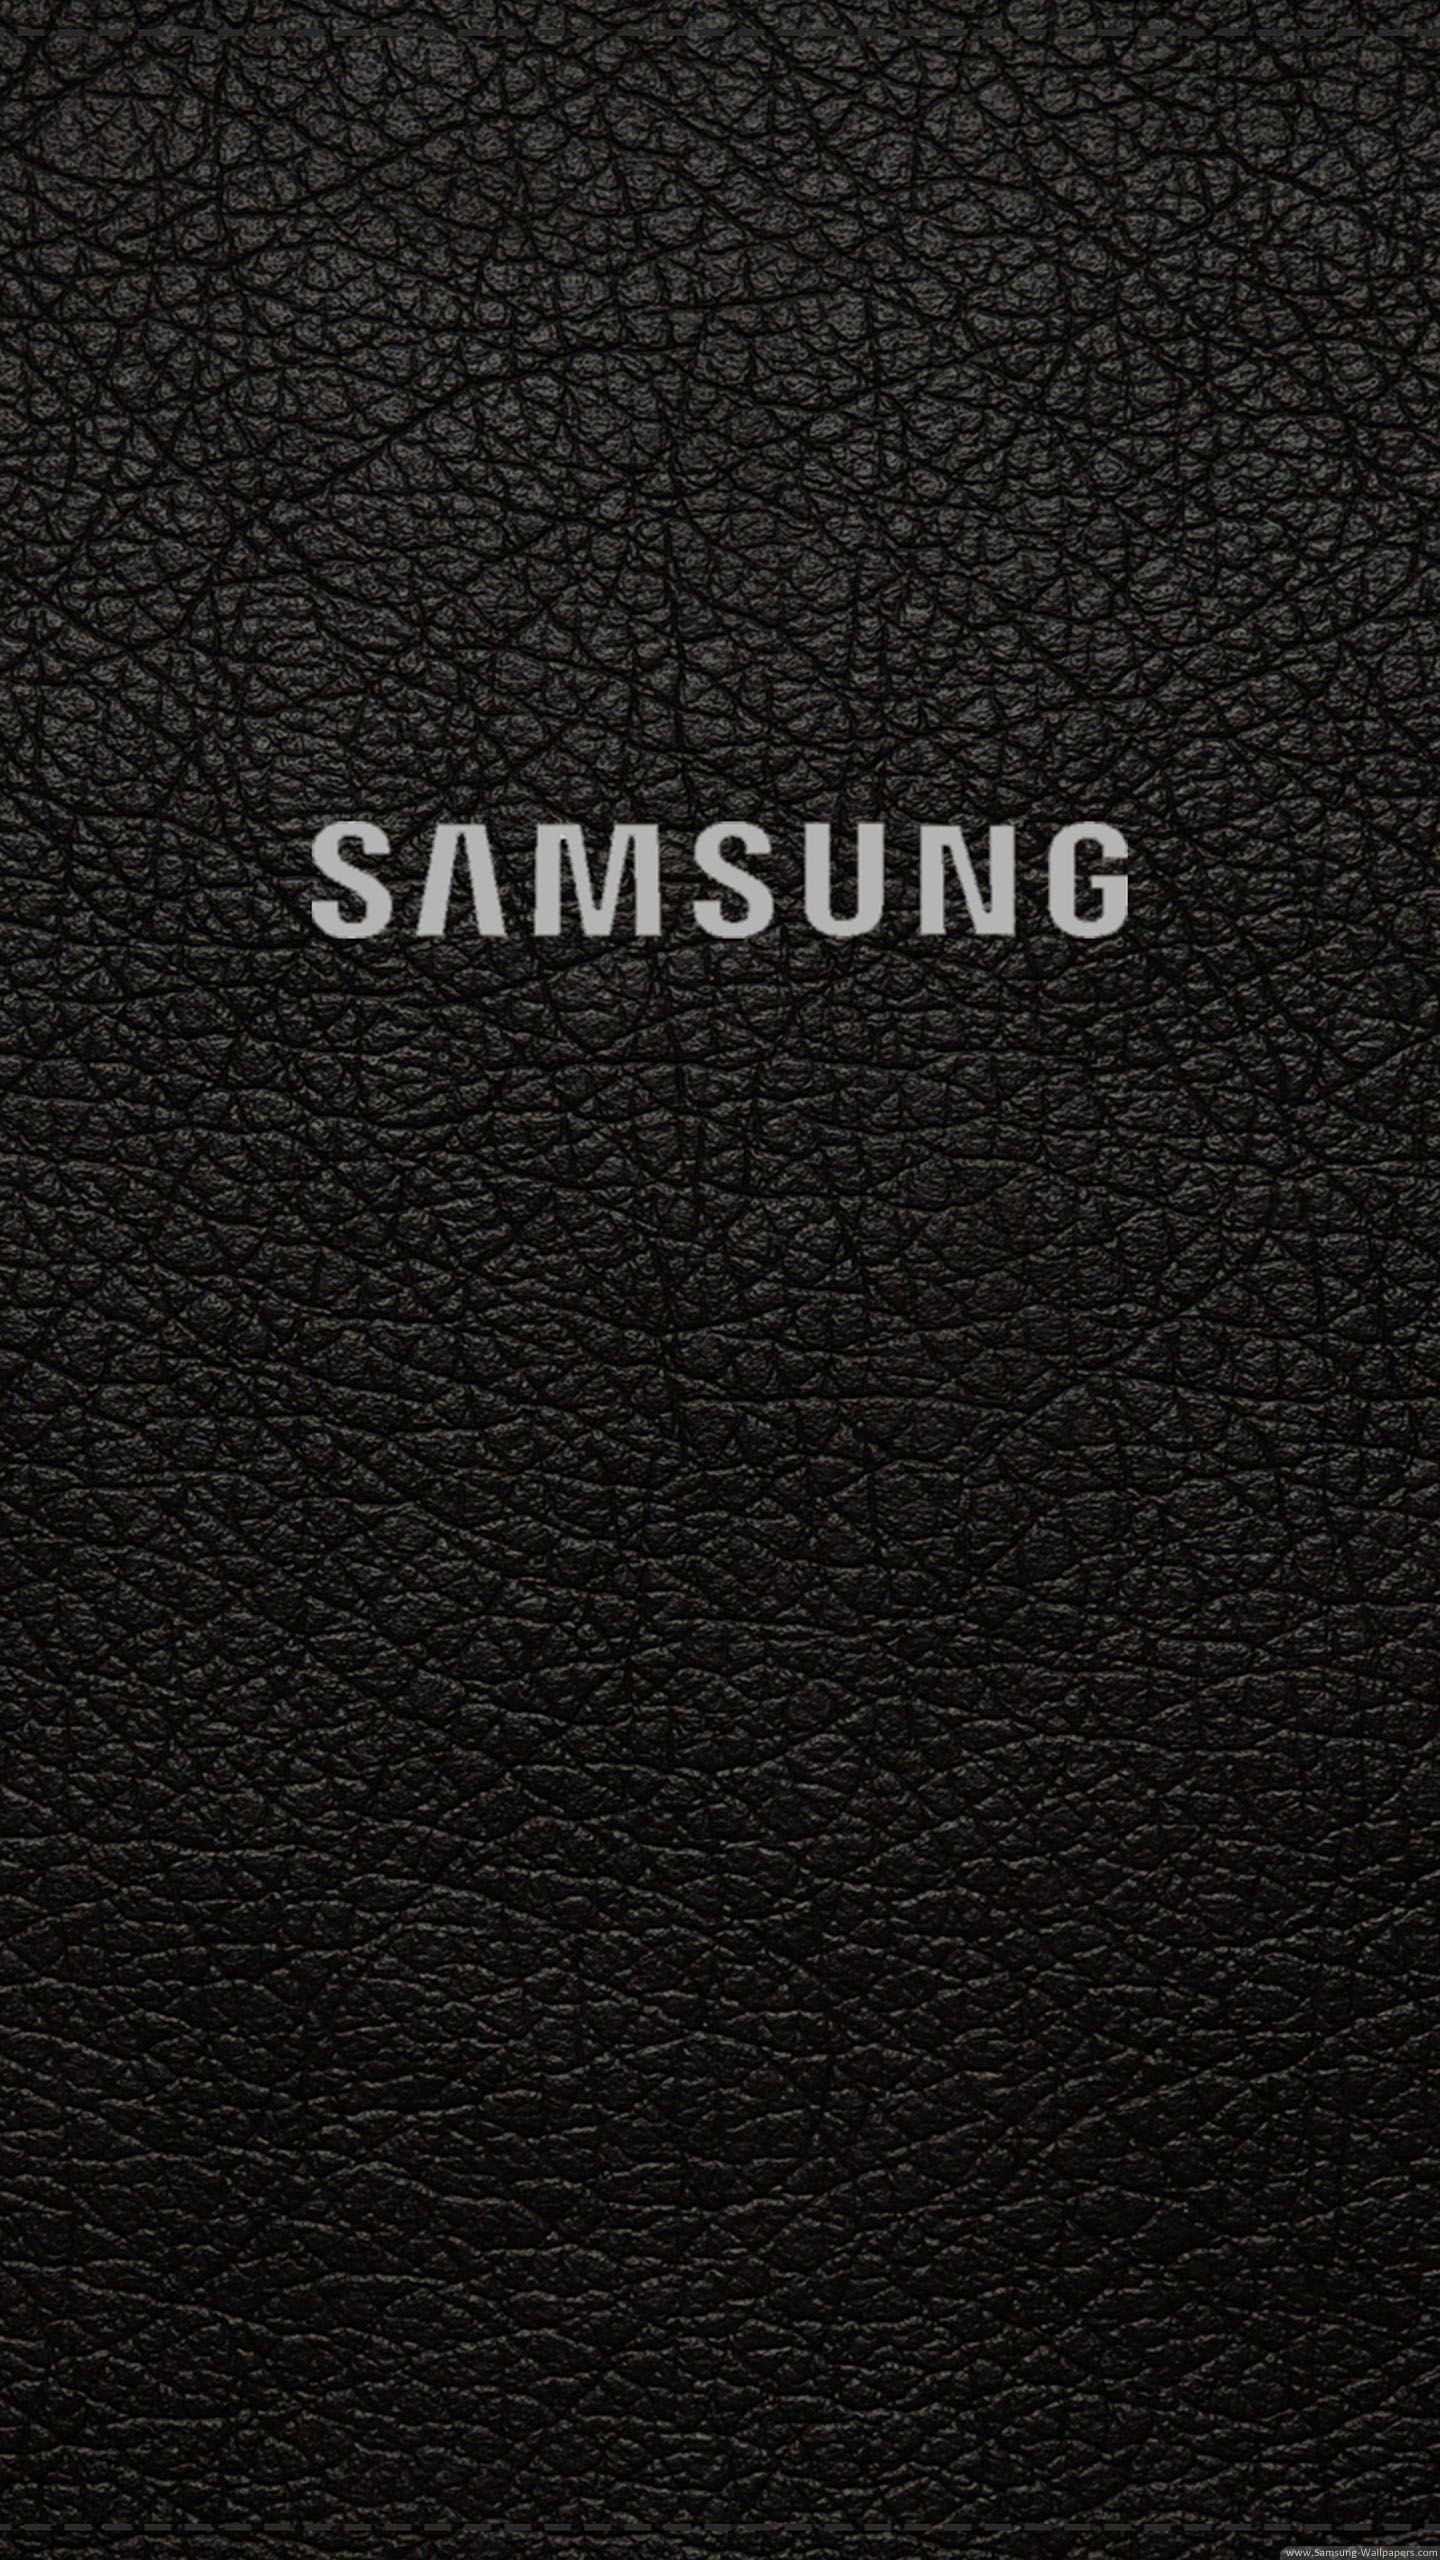 1440x2560 HD Samsung Wallpapers For Mobile Free Download